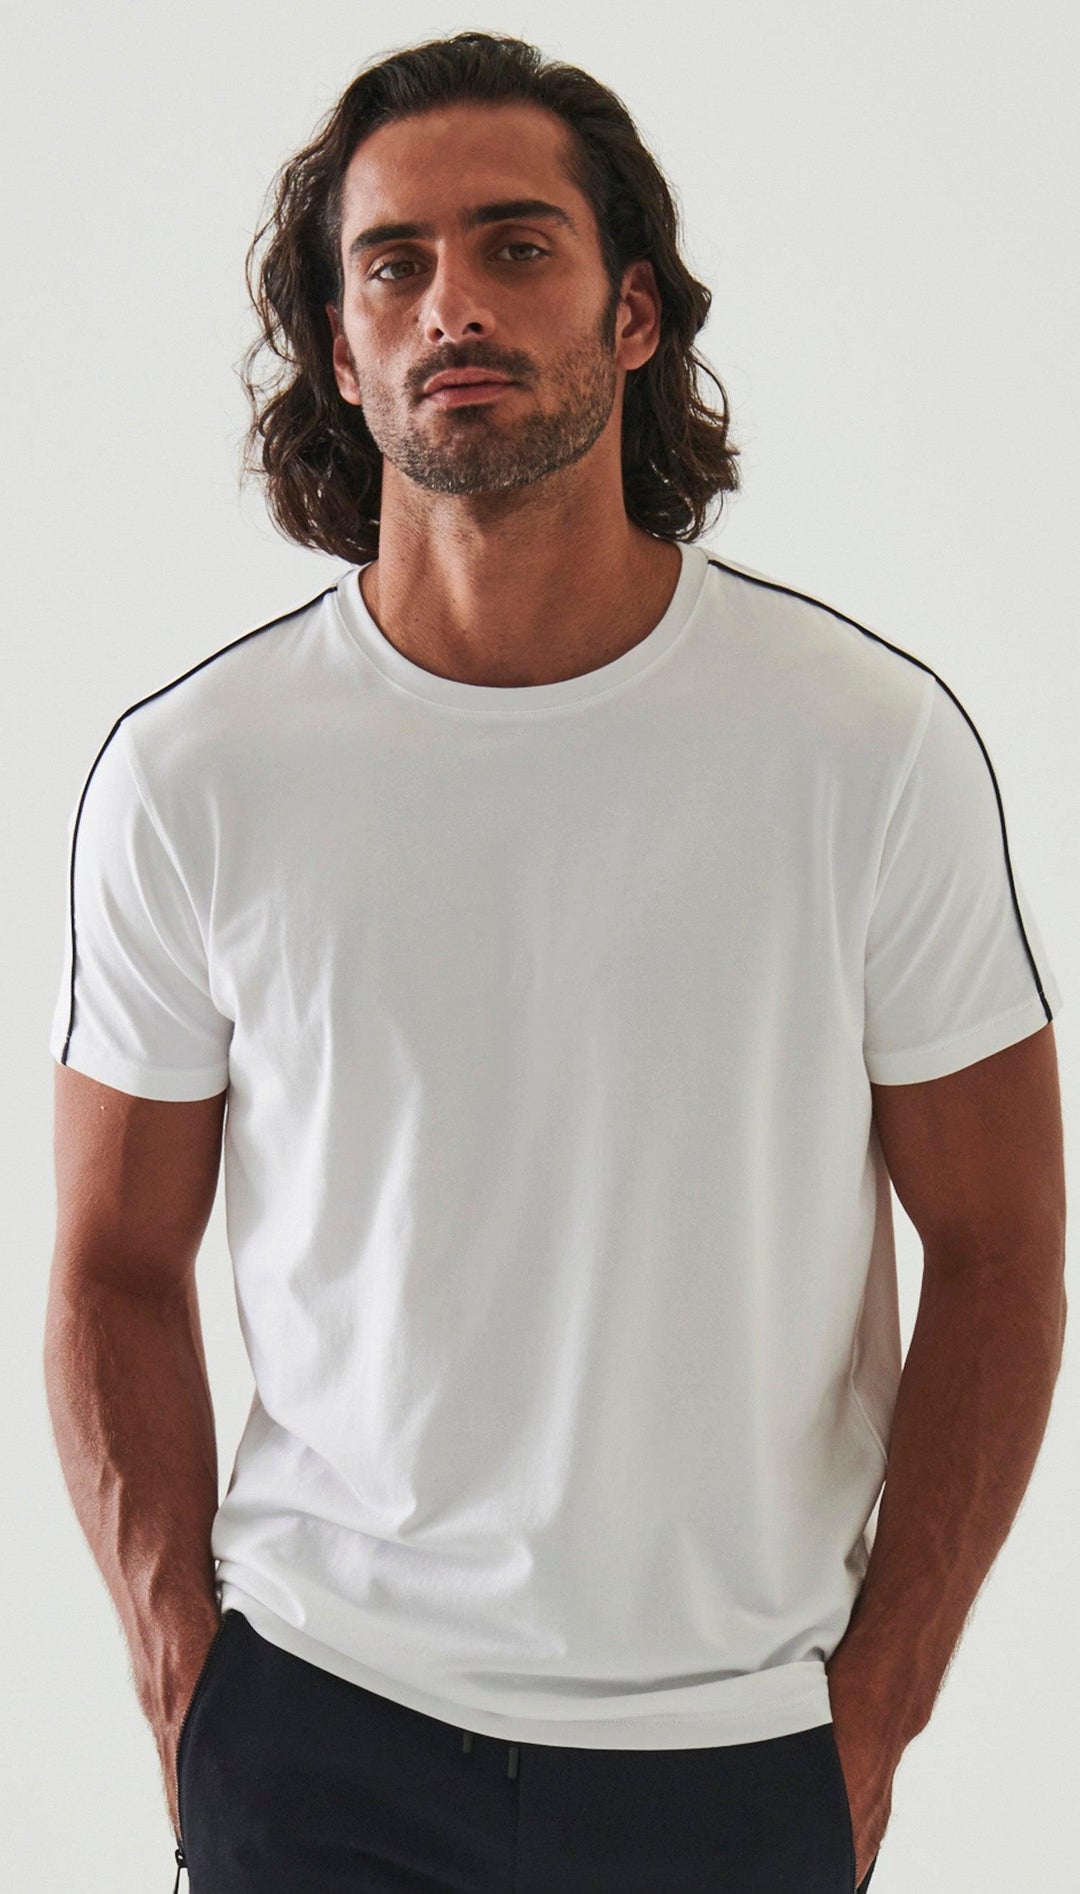 The ultimate in comfort and softness, this ultra soft pima cotton tee sports a fine contemporary style.  Crisp white with a raised black accent along the shoulders and down the sleeve. Soft pima cotton. Designed by Assaraf Italy. Classic tee shirt model Open sleeves and bottom. Modern fit, perfect for a slim to medium build.